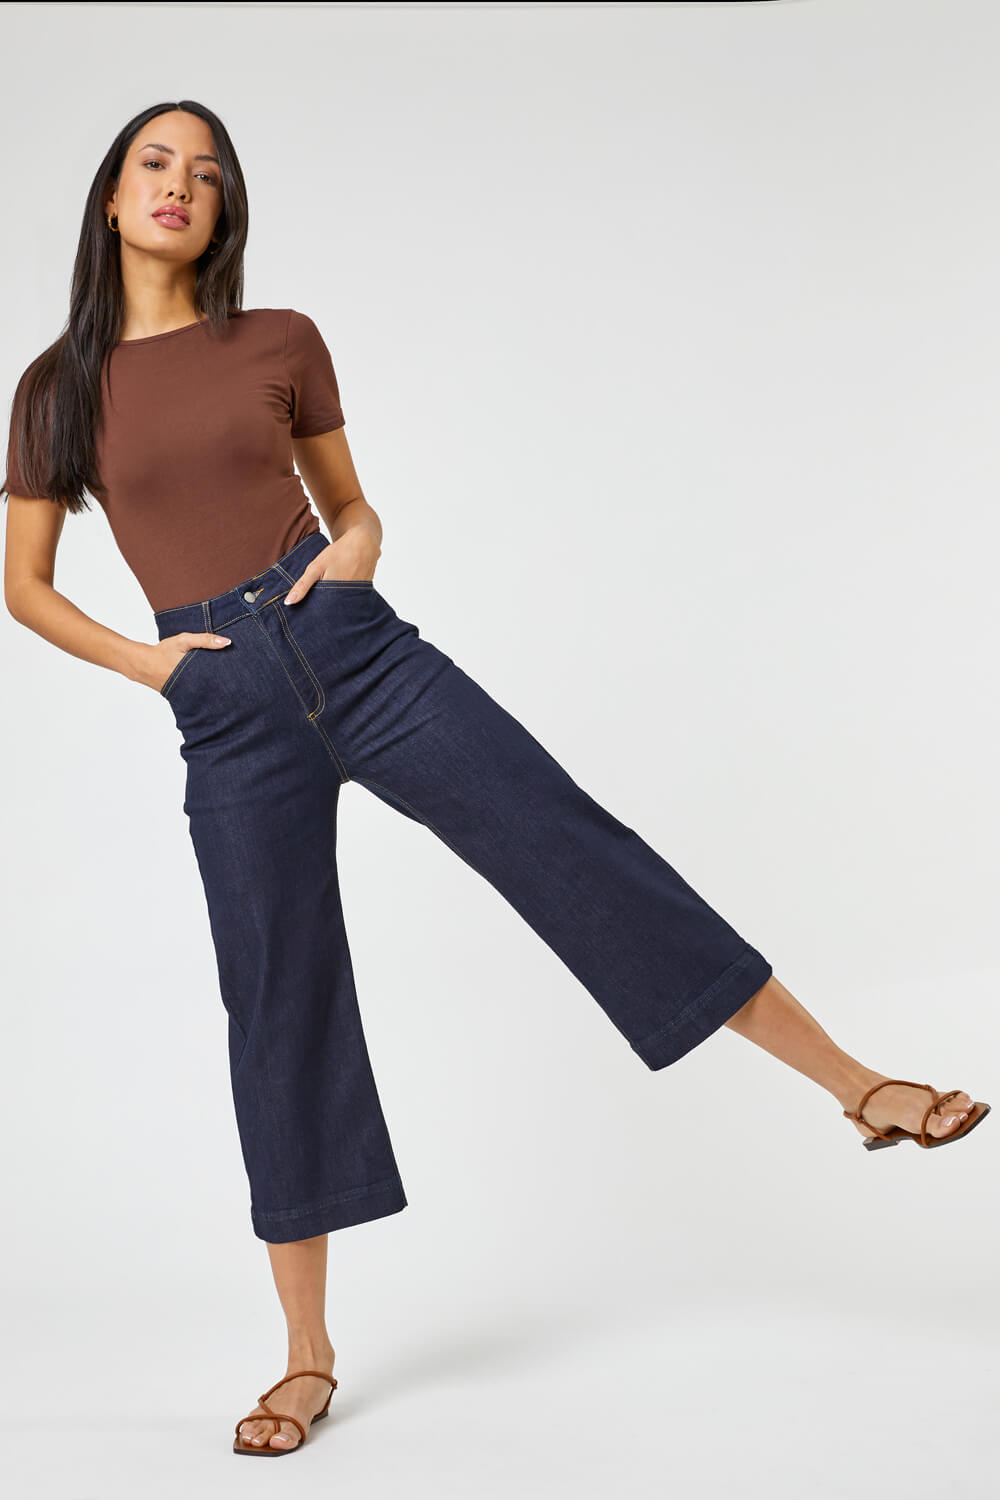 Culottes For Women Online – Buy Culottes Online in India